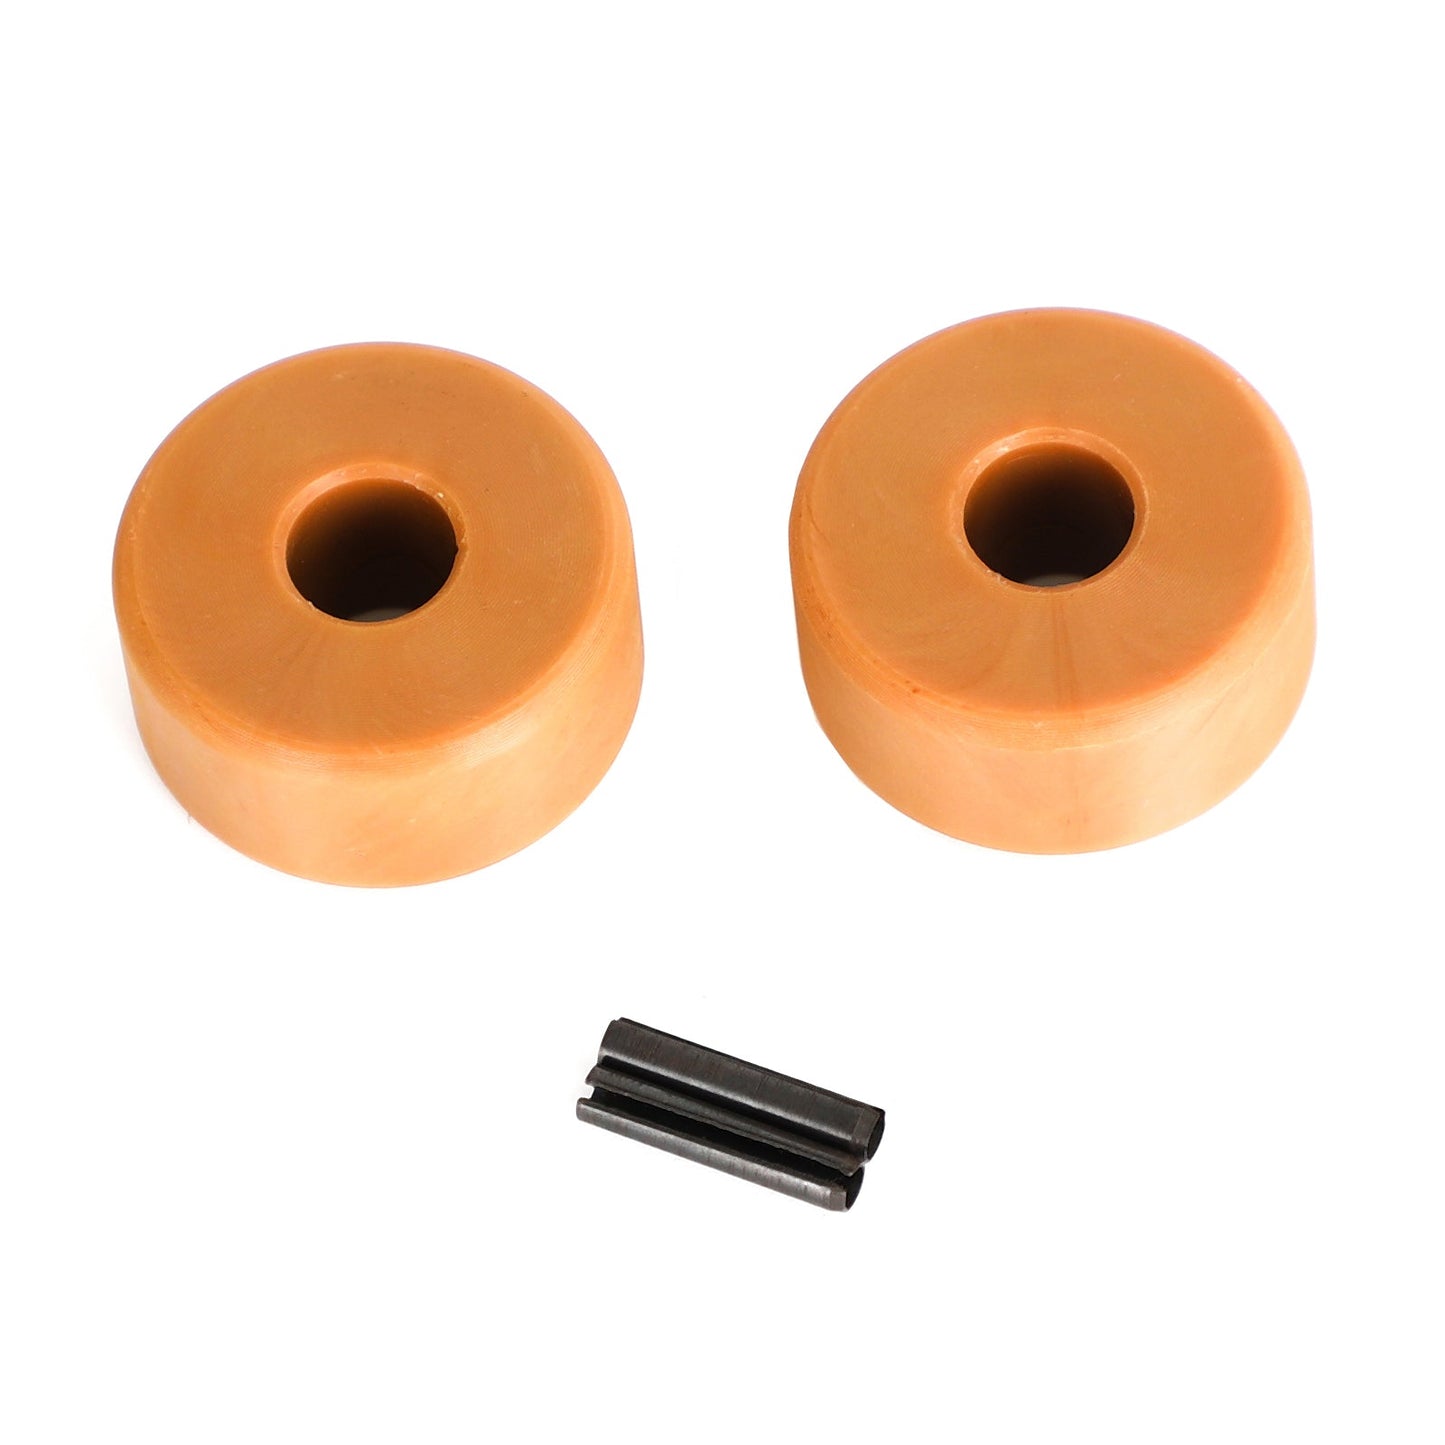 Secondary Clutch w/ Pins for Polaris Rollers Rzr Ranger 2016-2021 1000/900,Secondary Clutch Rollers with Upgraded Pins for Polaris RZR Ranger 2016-2021,Driven Clutch Roller Assembly w/ pins for Polaris Snowmobile Ranger XP4